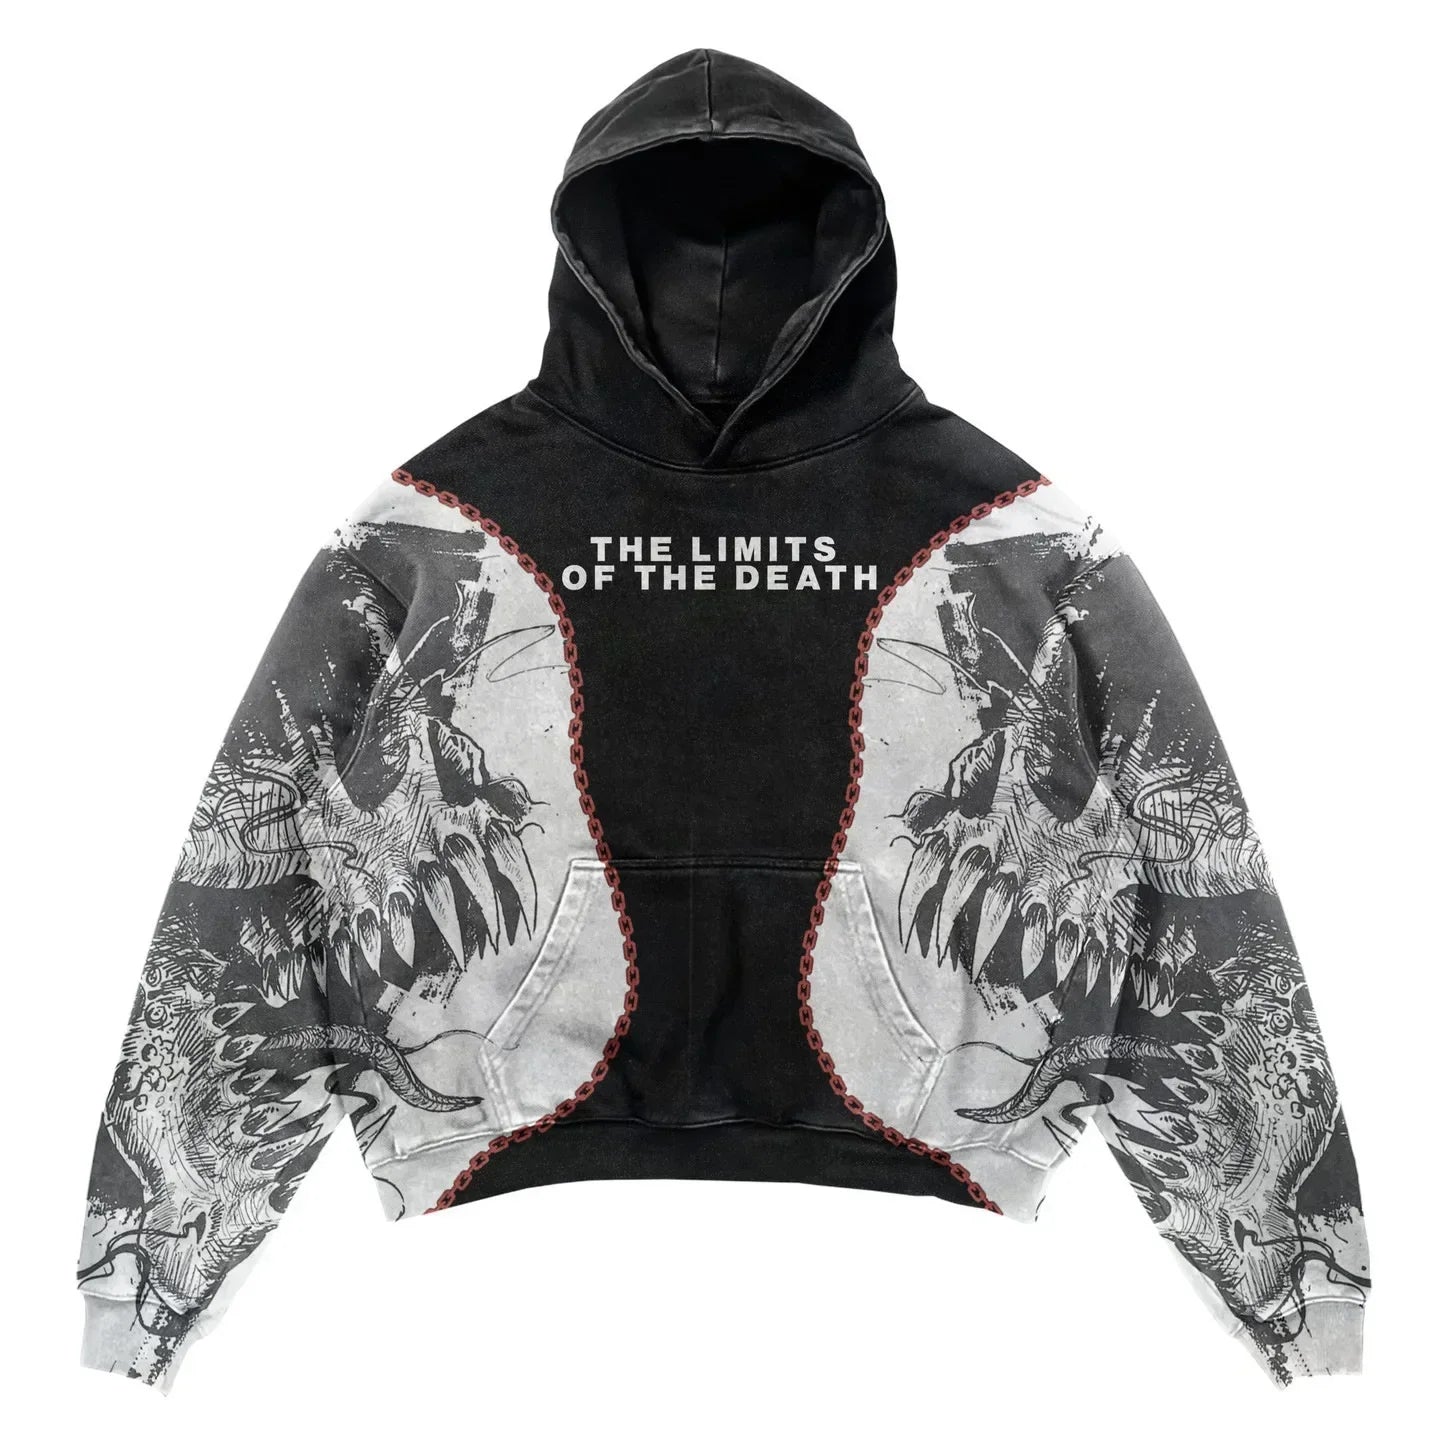 A Maramalive™ Explosions Printed Skull Y2K Retro Hooded Sweater Coat Street Style Gothic Casual Fashion Hooded Sweater Men's Female with a punk style design featuring monstrous jaws and skeletons, accompanied by the text "THE LIMITS OF THE DEATH" on the chest. Perfect for all four seasons.